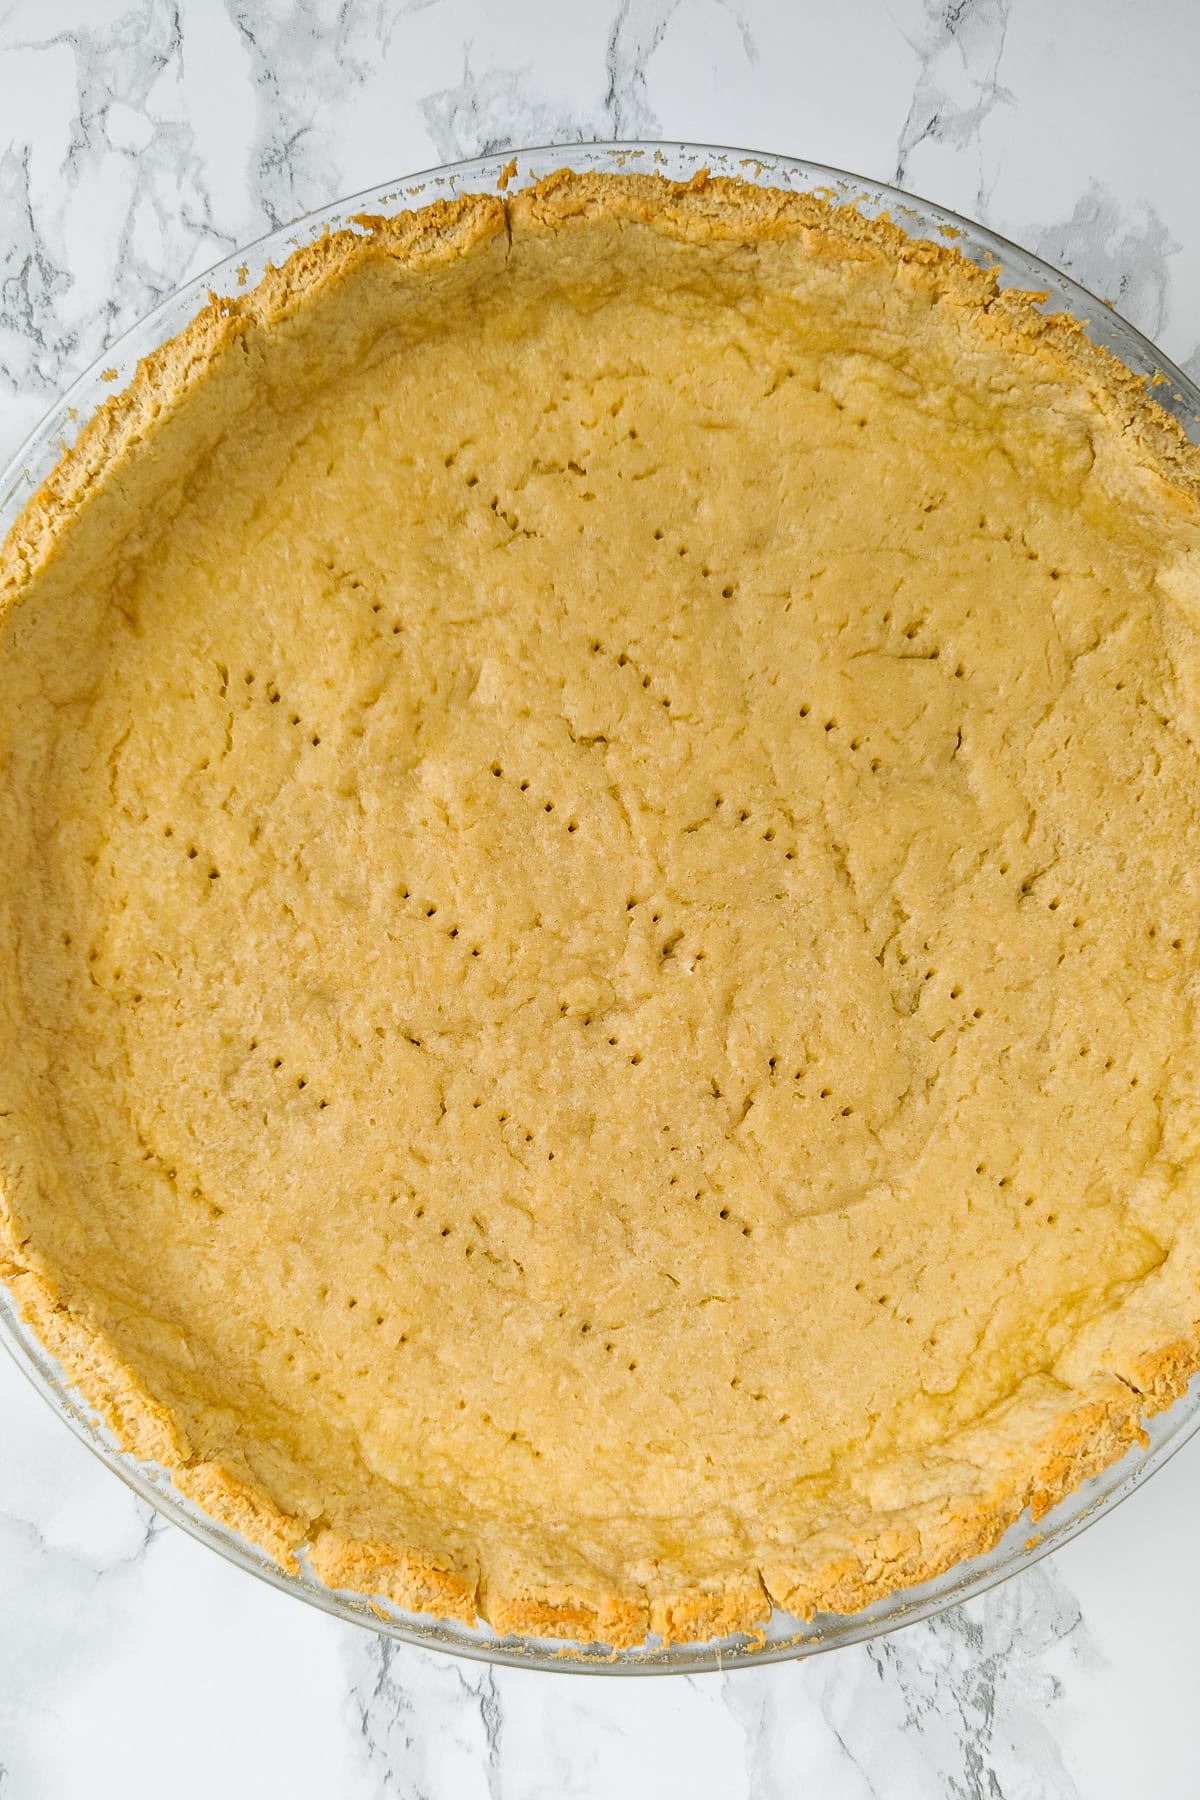 Top view of a plate with baked tart on a white marble background.